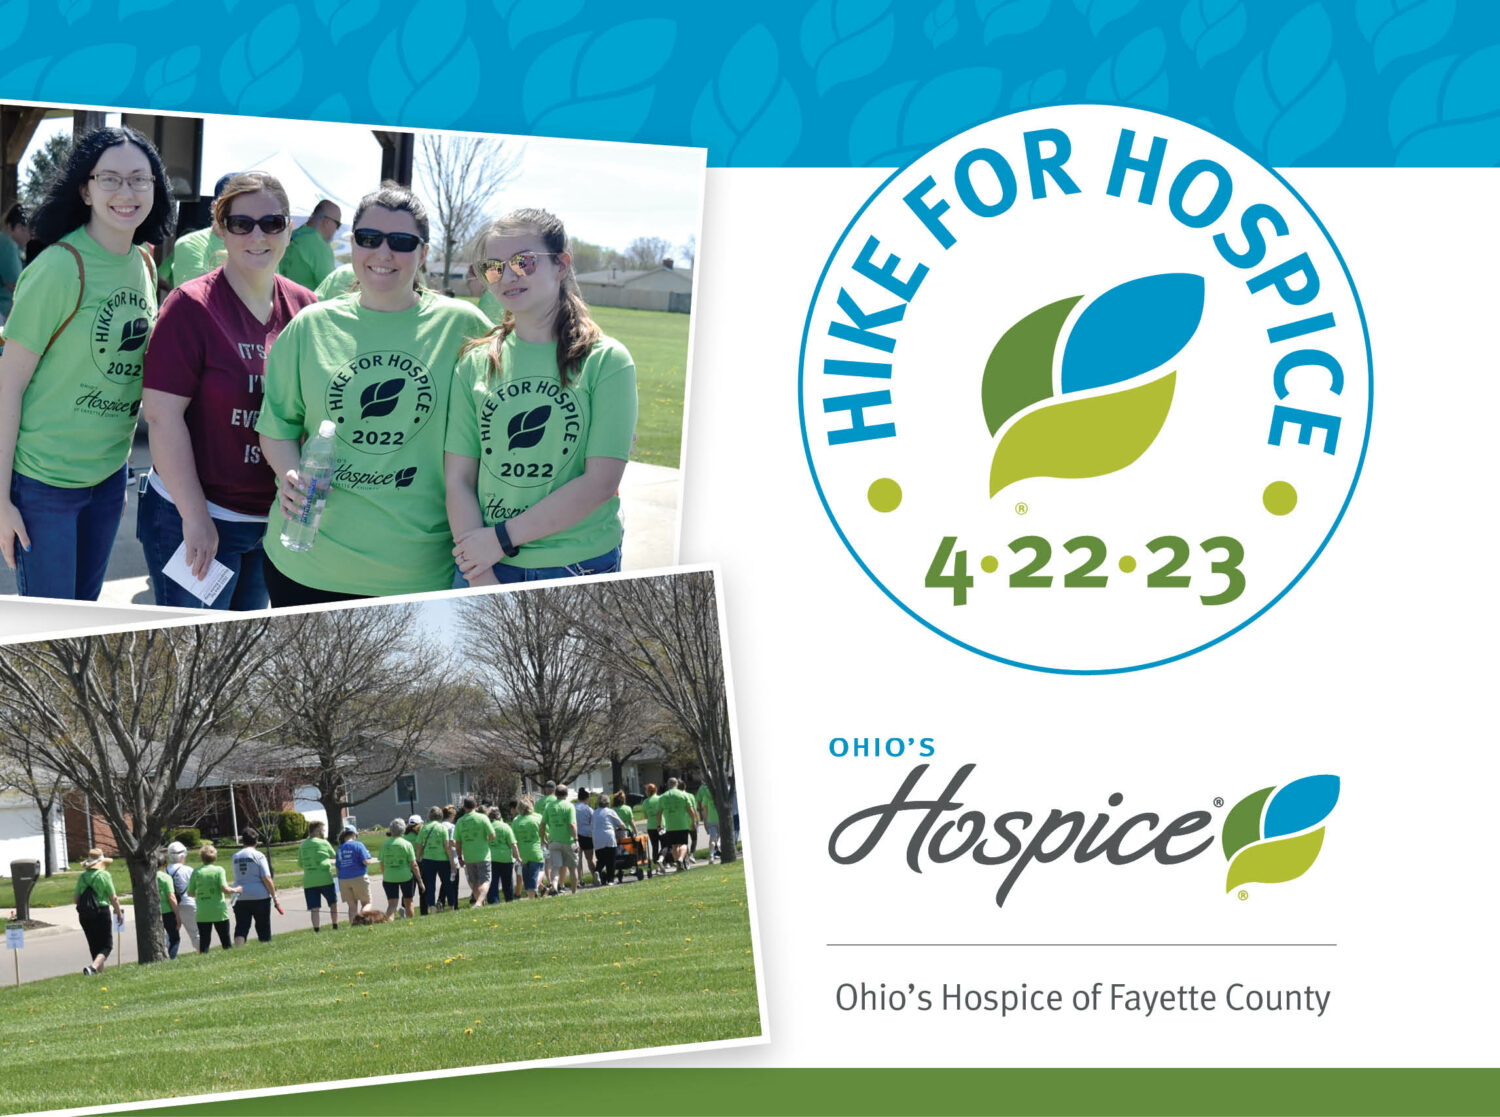 Hike for Hospice 2023 | Ohio's Hospice of Fayette County